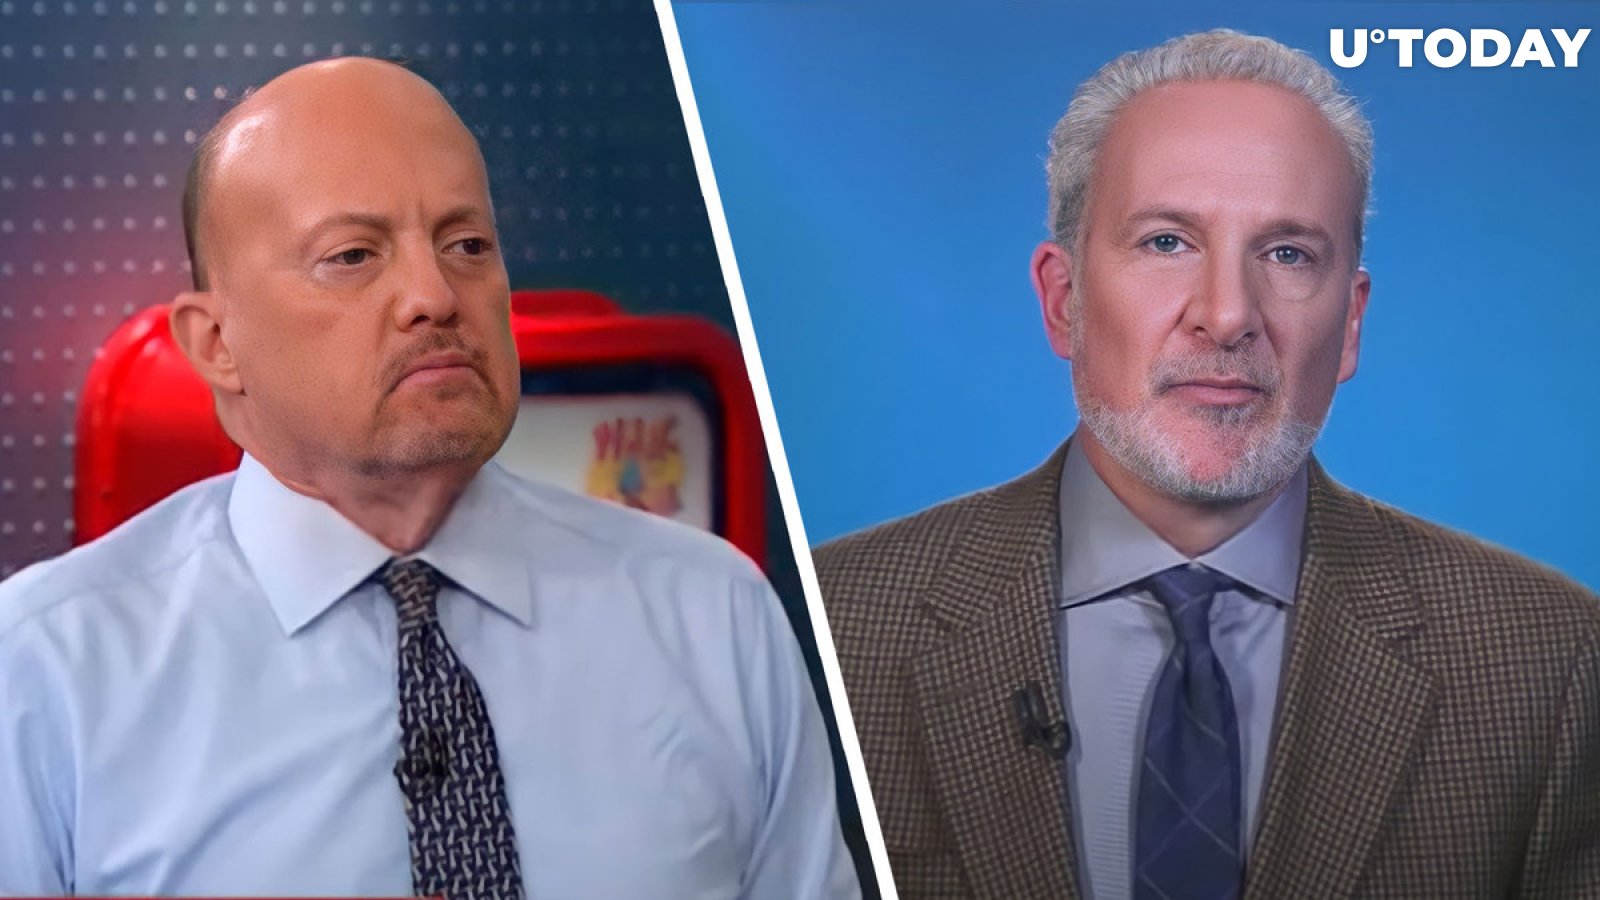 Jim Cramer and Peter Schiff Urge to Sell Bitcoin, But BTC Whales Act Opposed